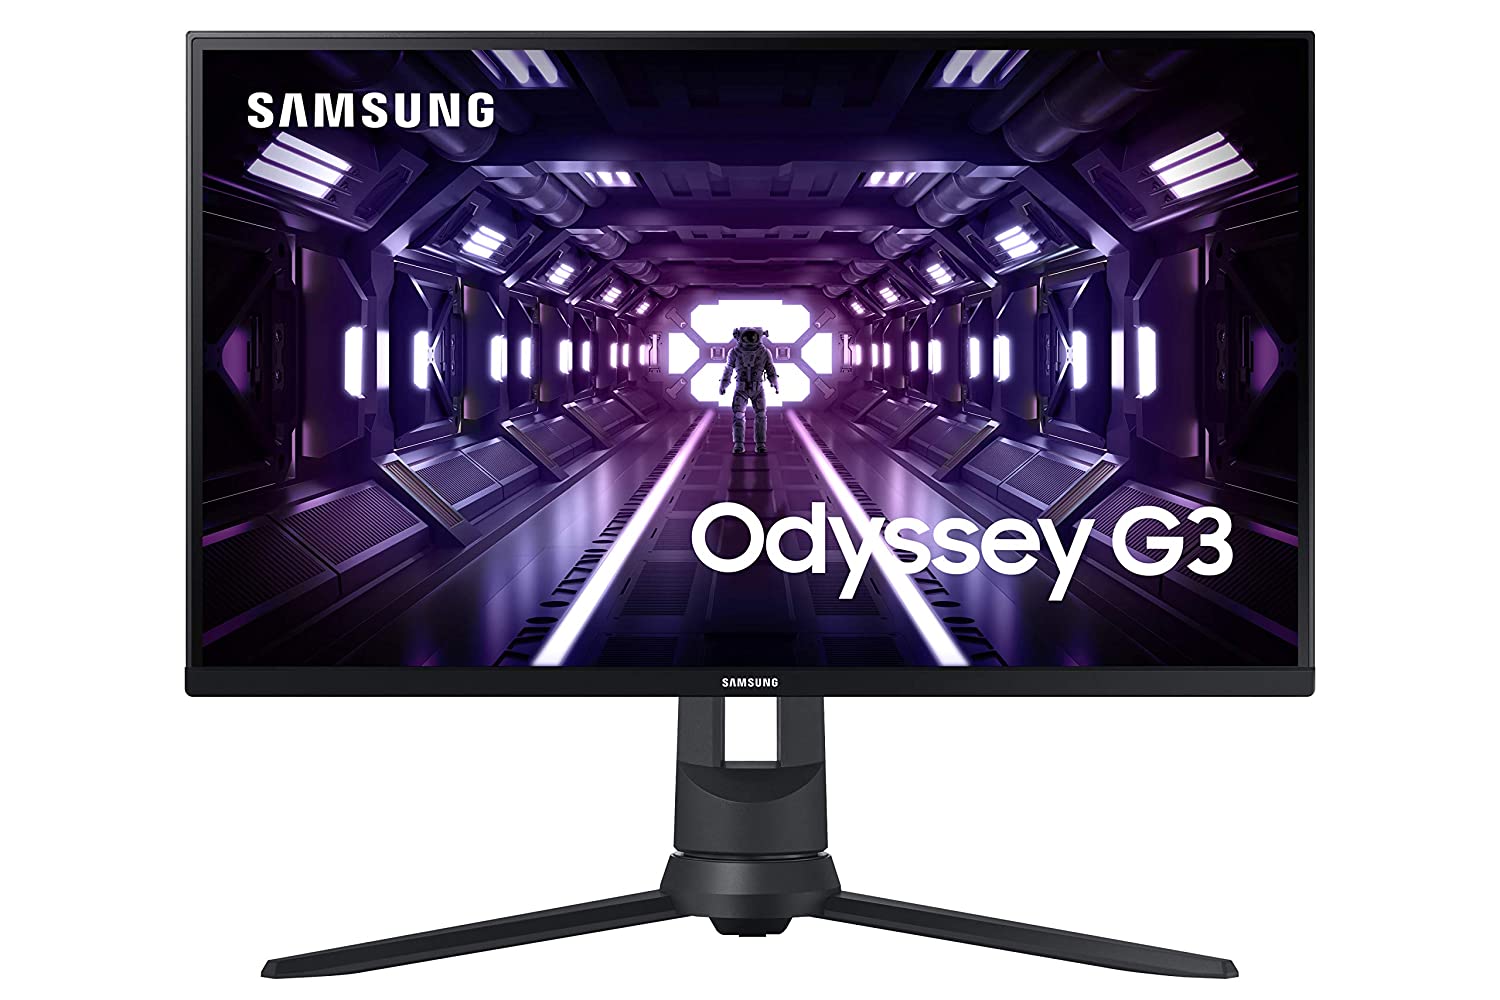 Top 24-inch Monitors with 144Hz Display Under Rs 20,000